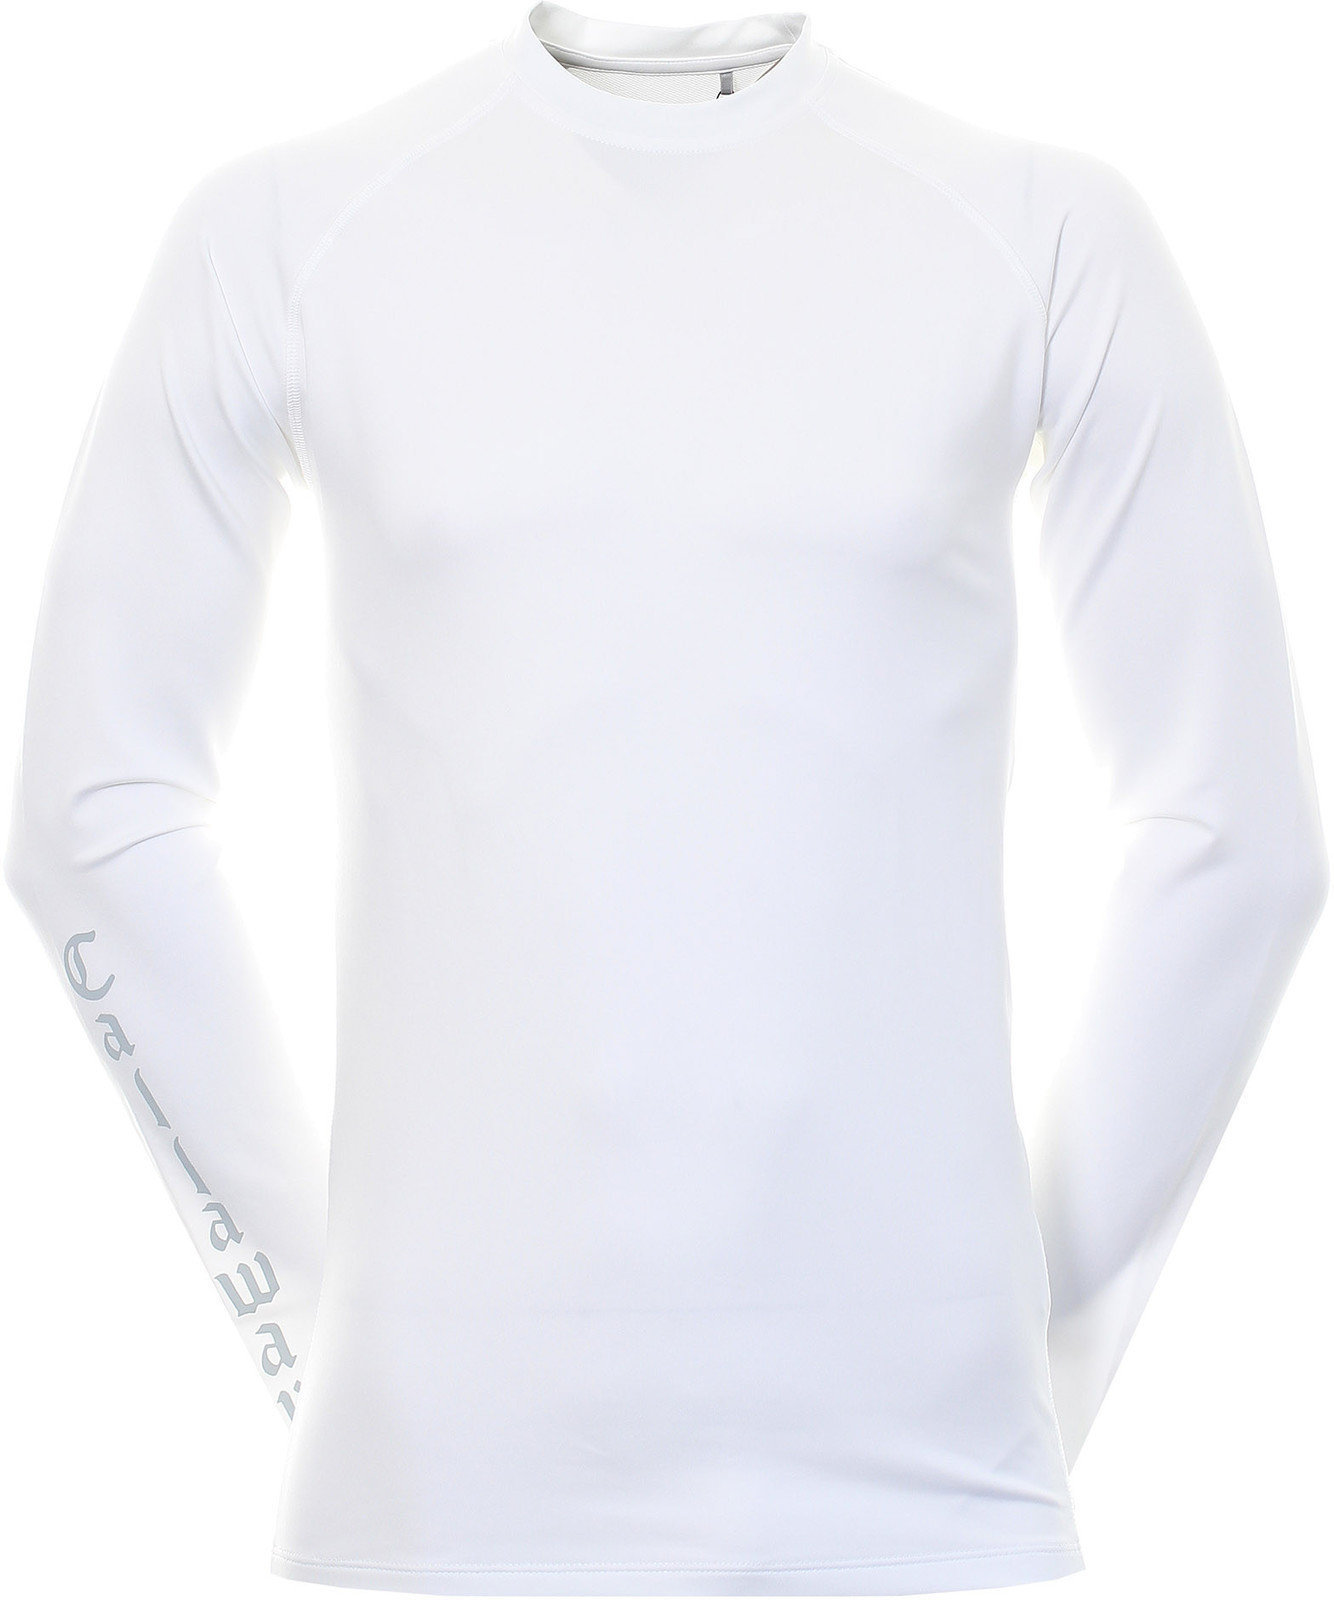 Vêtements thermiques Callaway Long Sleeve Thermal Bright White M